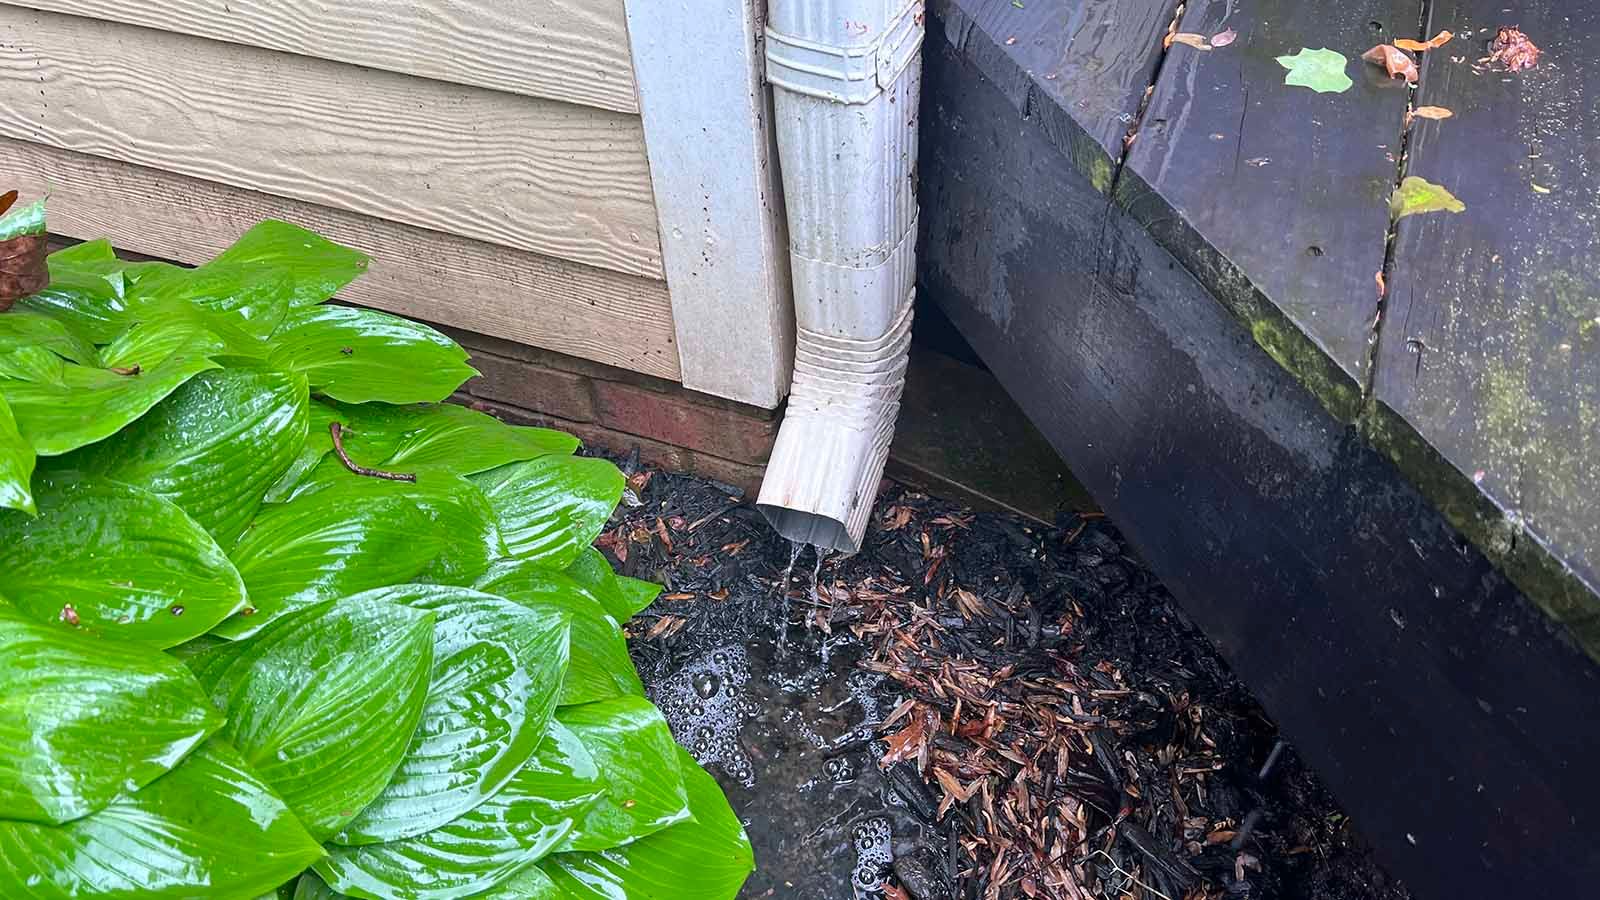 Home rain gutter draining into a puddle beside a house